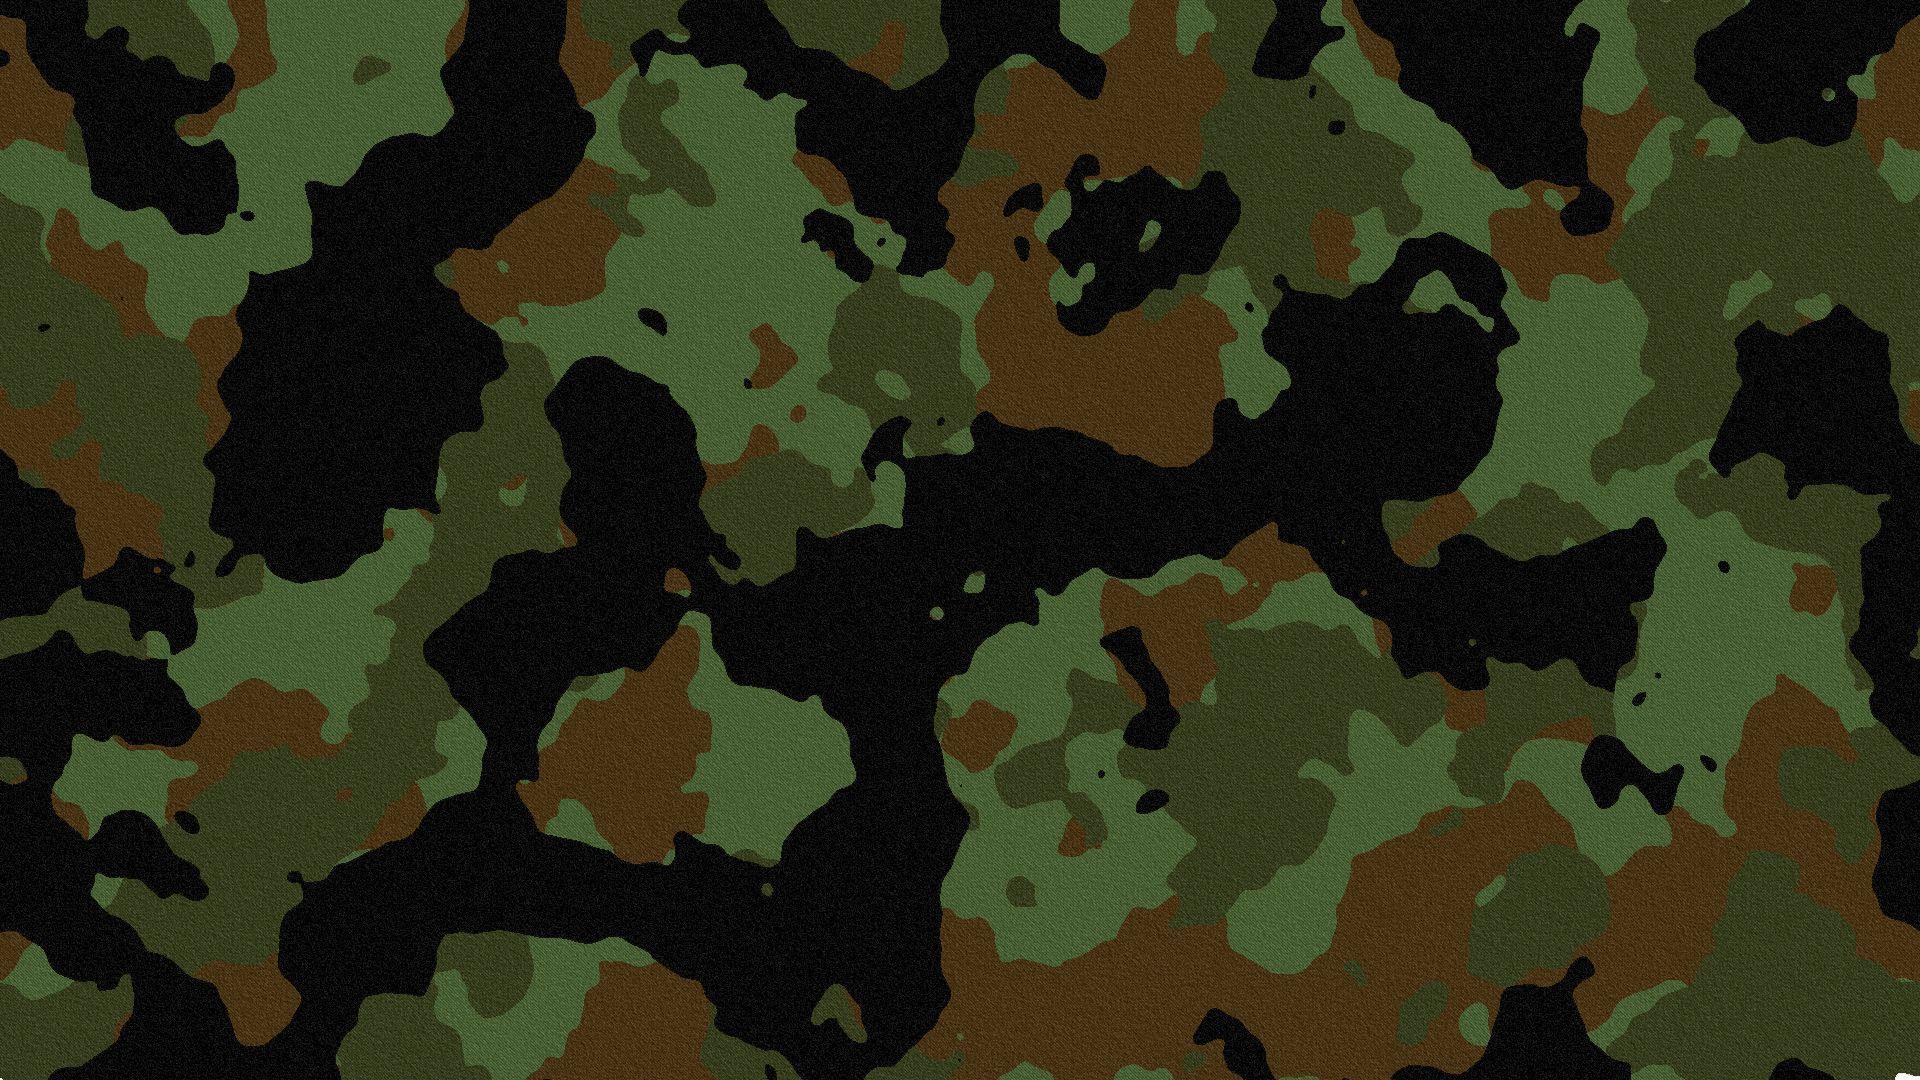 Camouflage Pattern Abstract Hd Wallpaper 1920×1080 12500